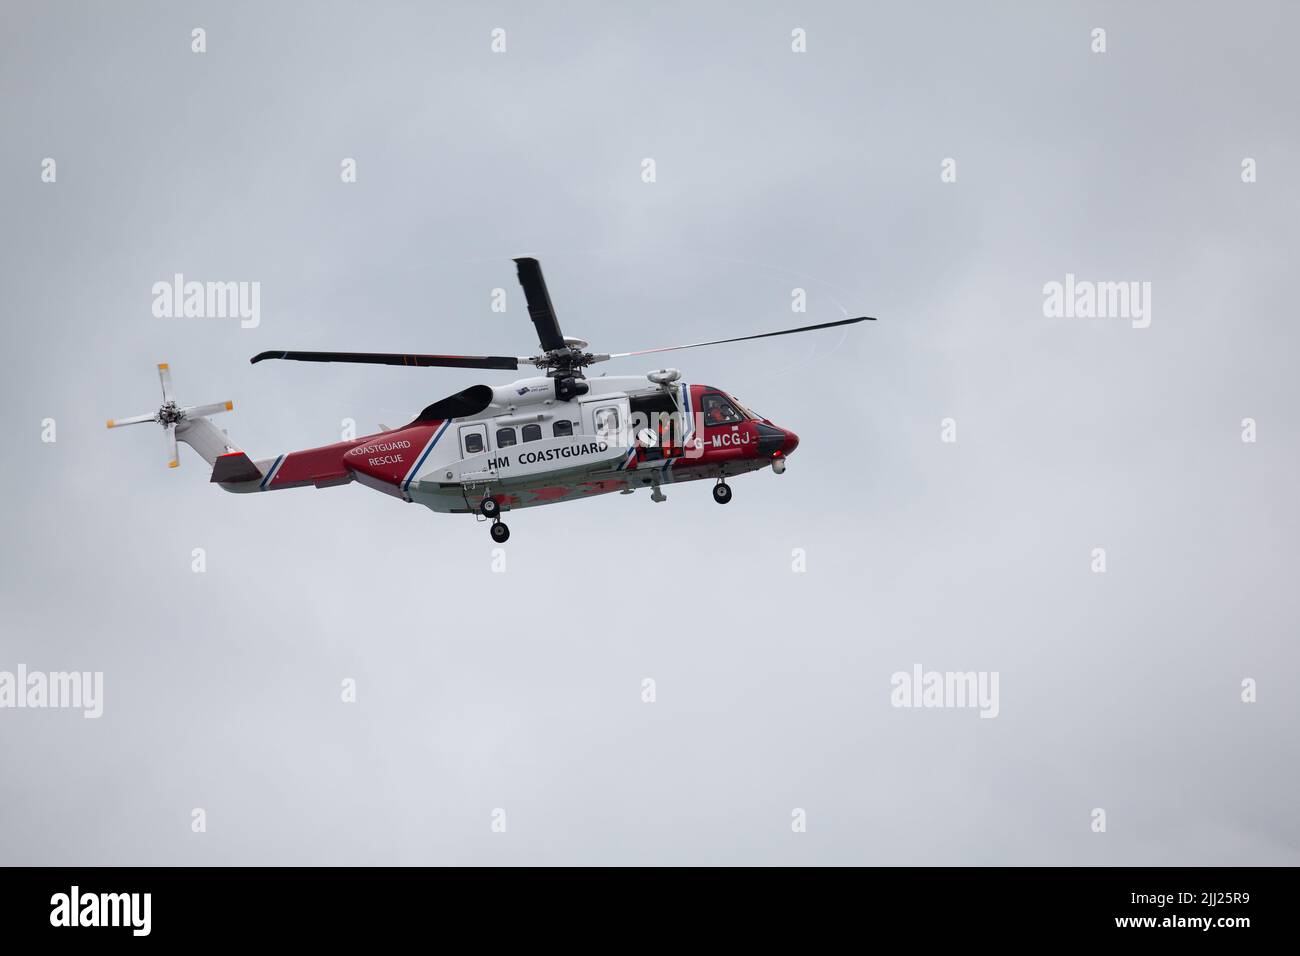 22.7.2022 A HM Coastguard Rescue Helicopter arriving at the scene of an accident in the village of Moelfre, Anglesey, North Wales UK - P Liggins/Alamy Live News Stock Photo